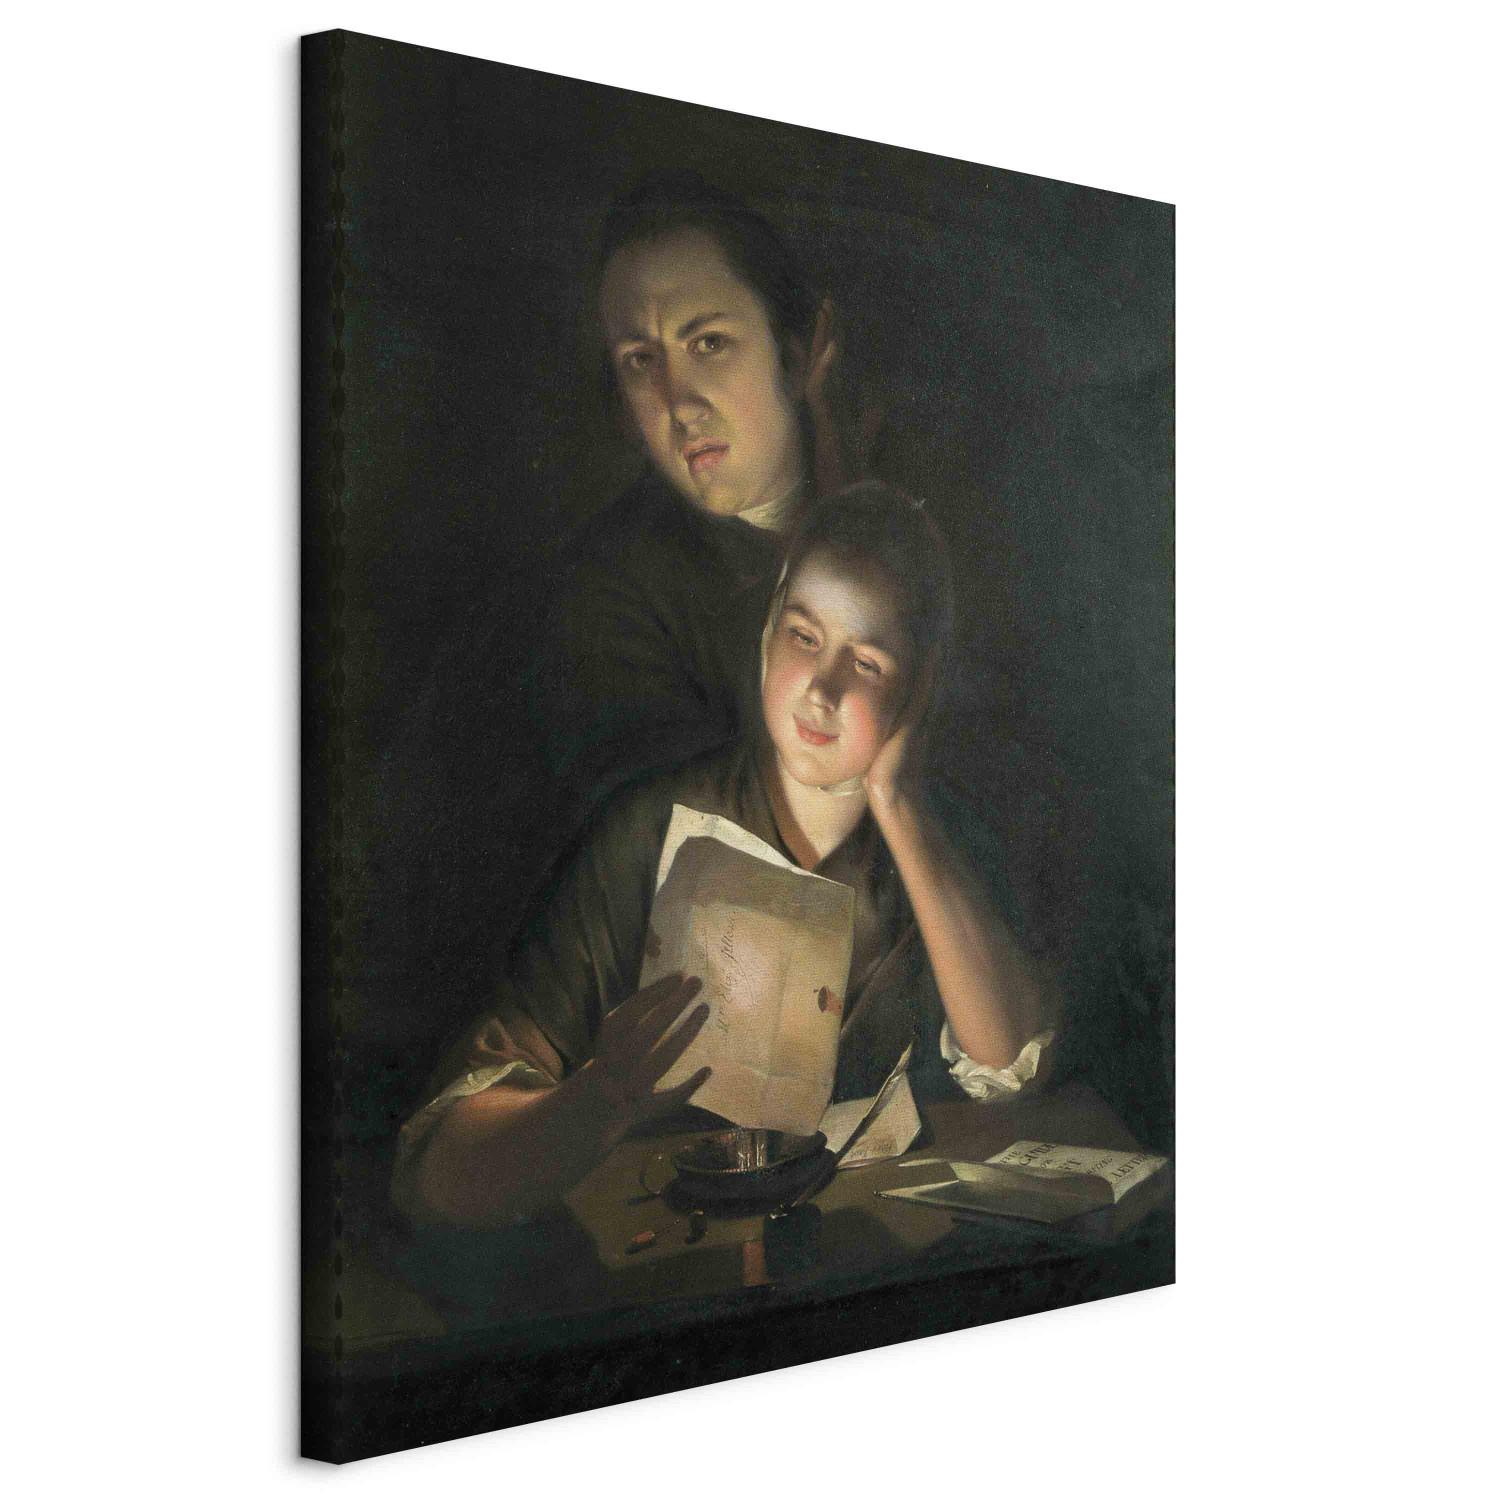 Cuadro famoso A Girl reading a letter by Candlelight, with a Young Man peering over her shoulder